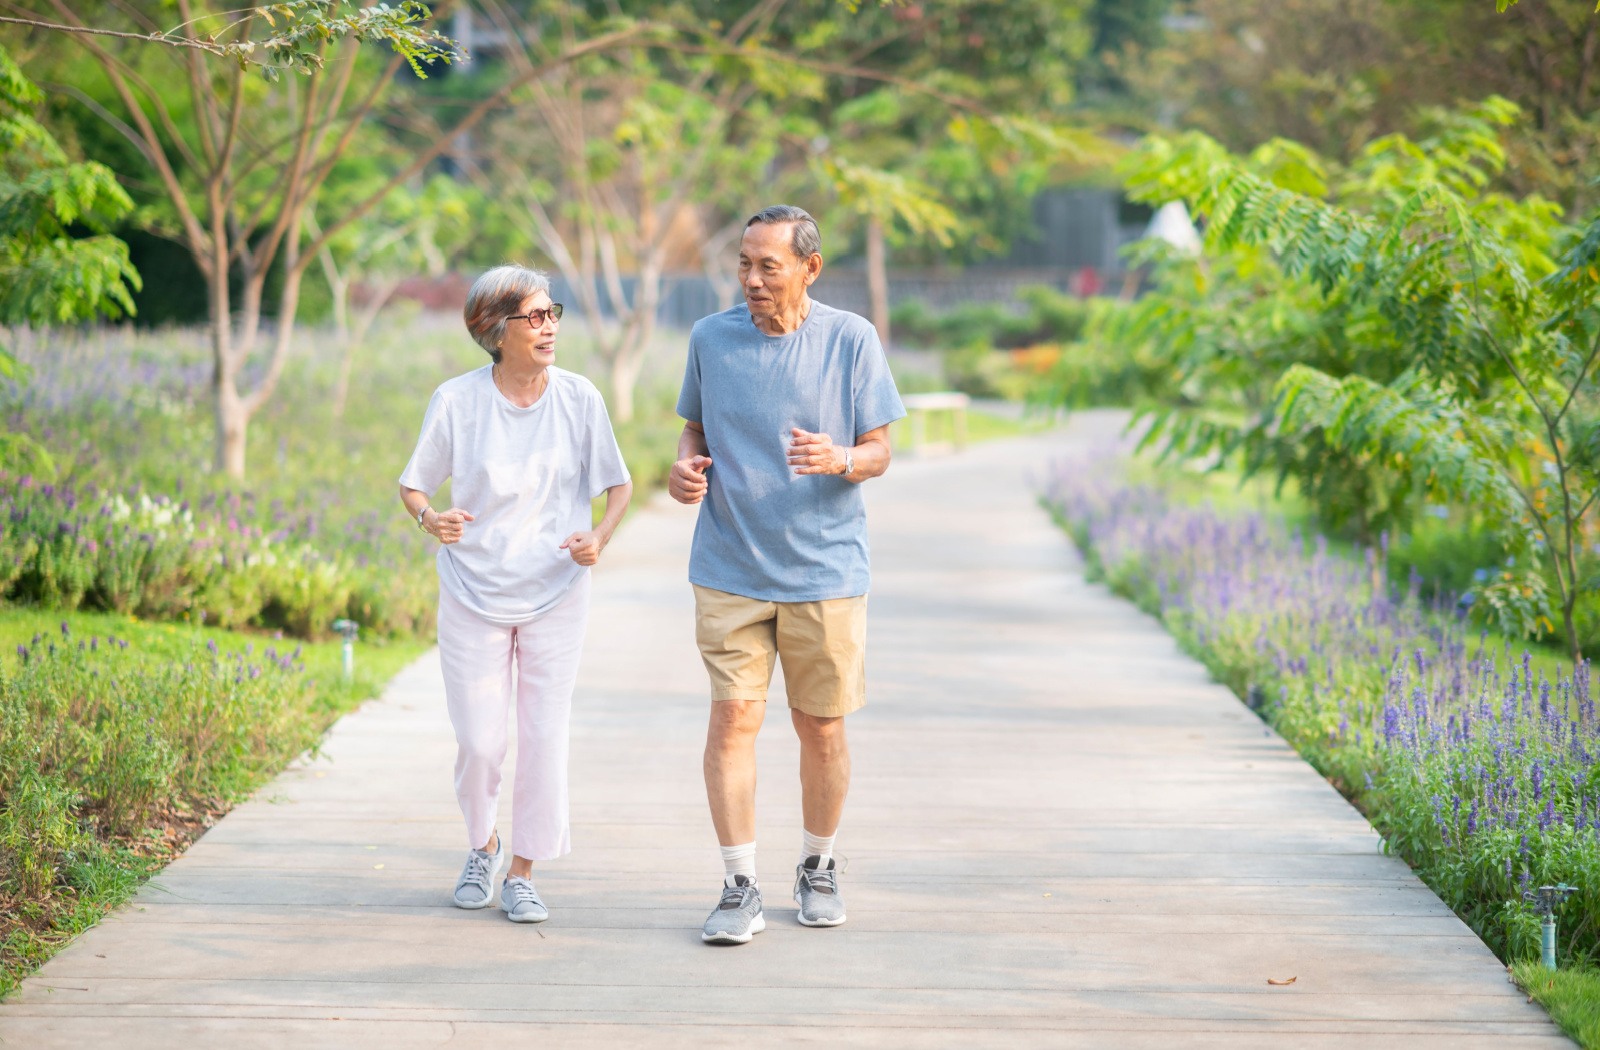 Mature man and woman jogging in a park.